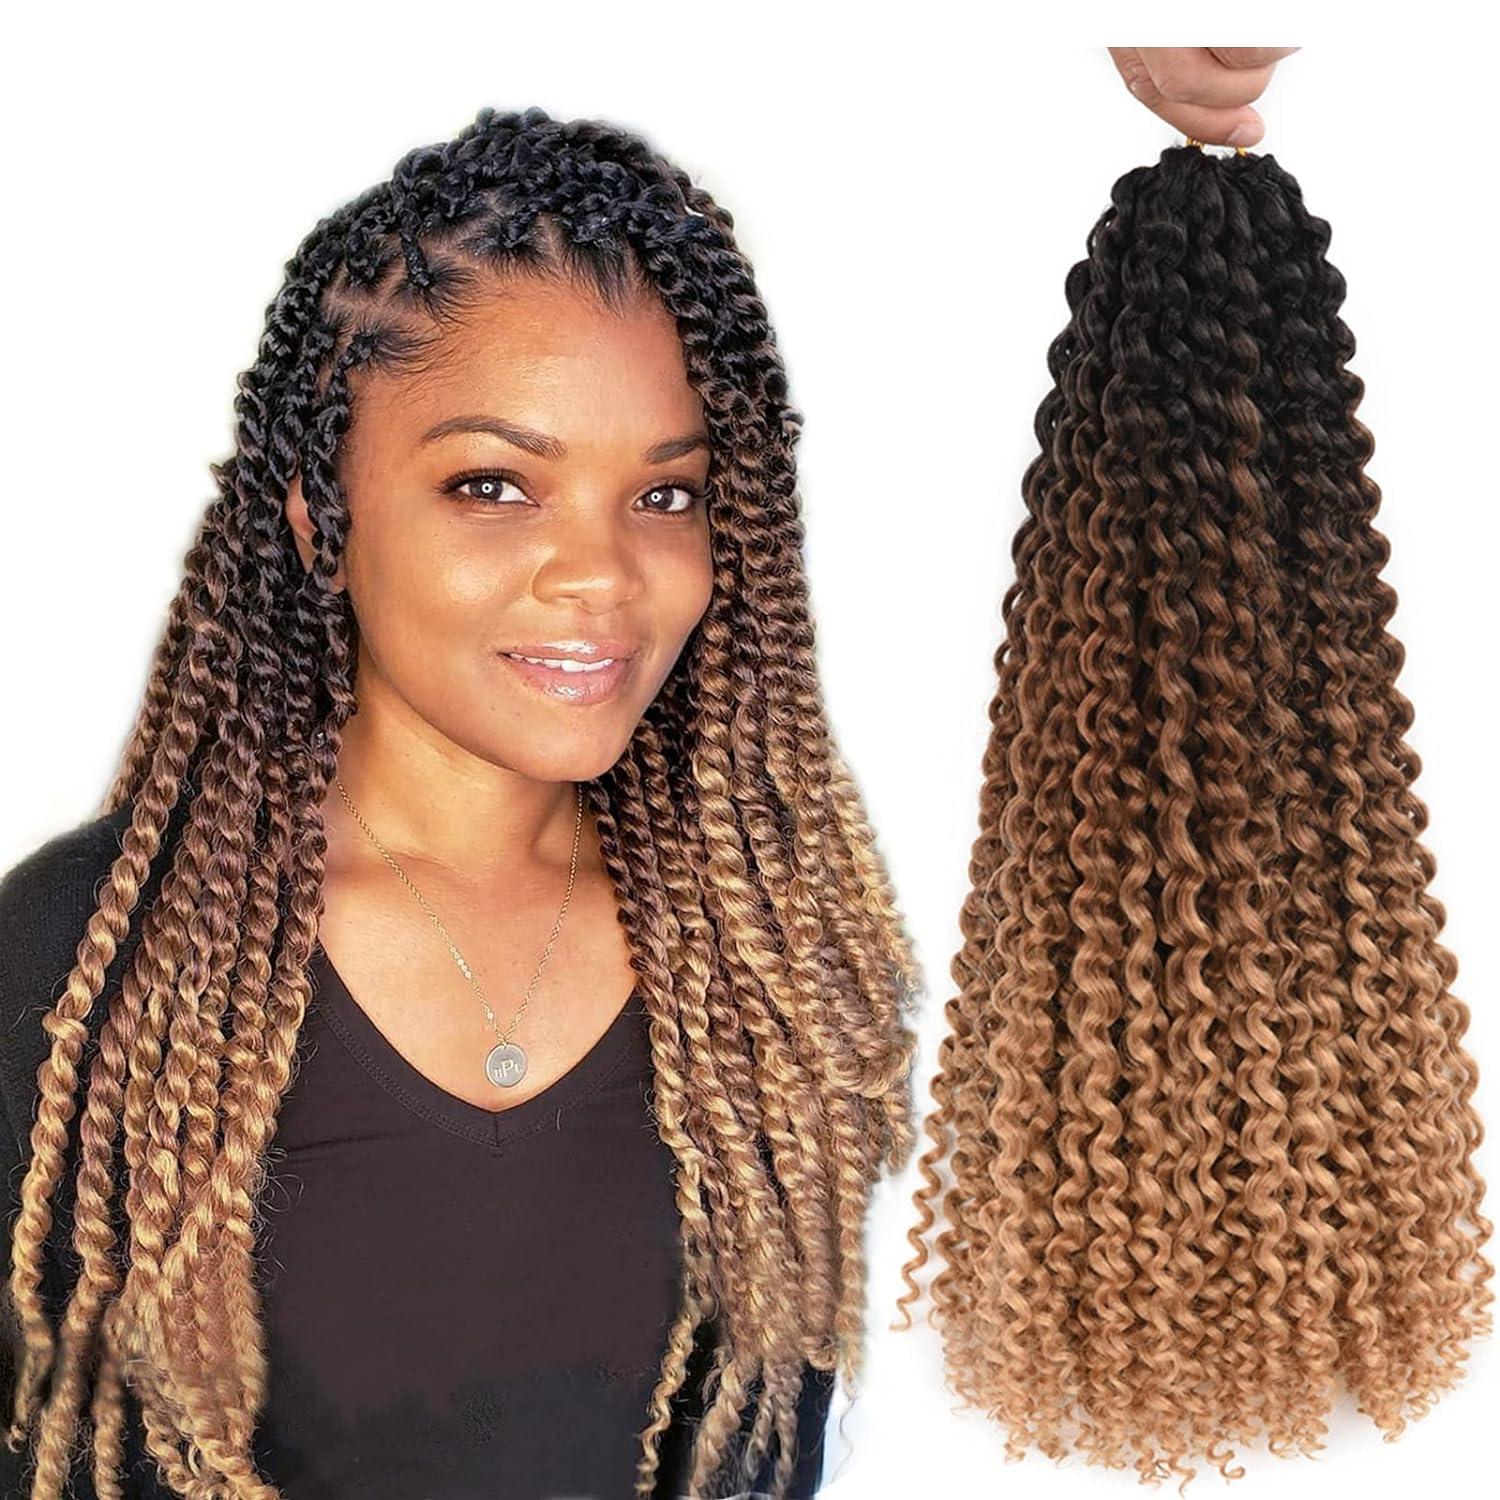 Passion Twist Hair Water Wave Crochet Hair For Black Women 18 Inch 6 Packs  Passion Twists Braiding Hair Long Bohemian Curly Crochet Braids Synthetic  Hair Extensions (18inch Black-dark brown-light brown) 18 Inch (